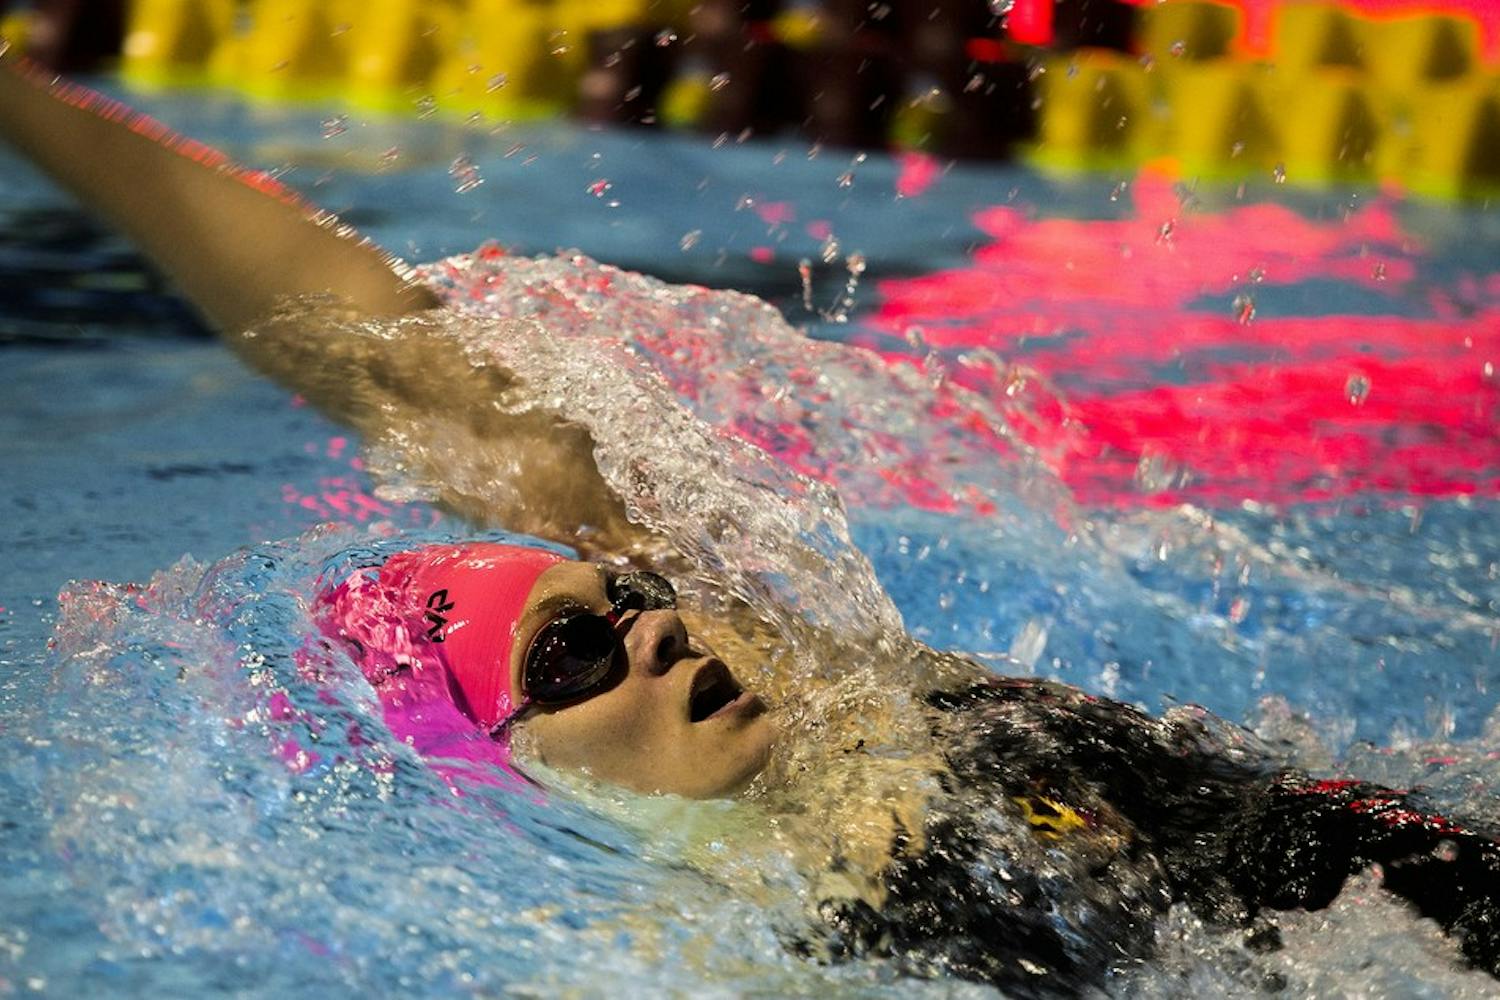 Kallyn Barkey swims the 200 individual medley at the ASU women's swimming meet on Thursday, Oct. 22, 2015, at the Mona Plummer Aquatic Complex in Tempe, Ariz. The Sun Devils lost the meet to the Washington State Cougars, 115-90. 